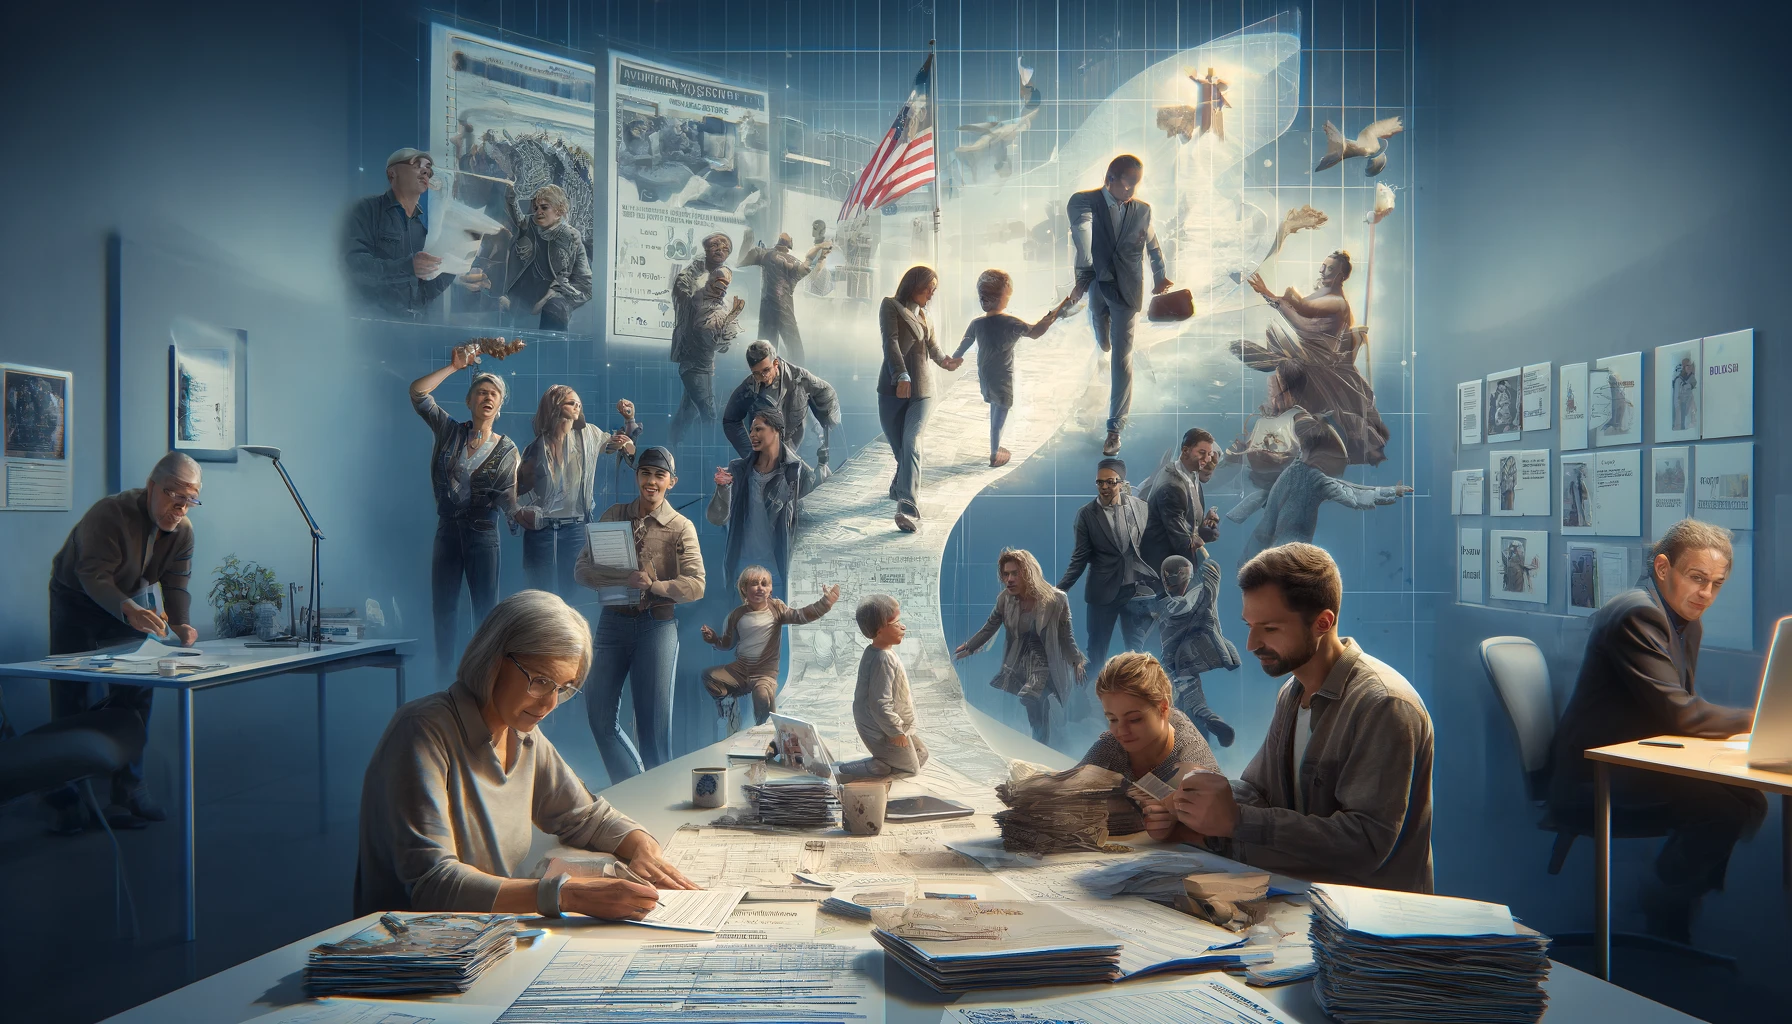 A realistic montage image depicting a family overcoming challenges together through the family reunification process, highlighting determination and resilience